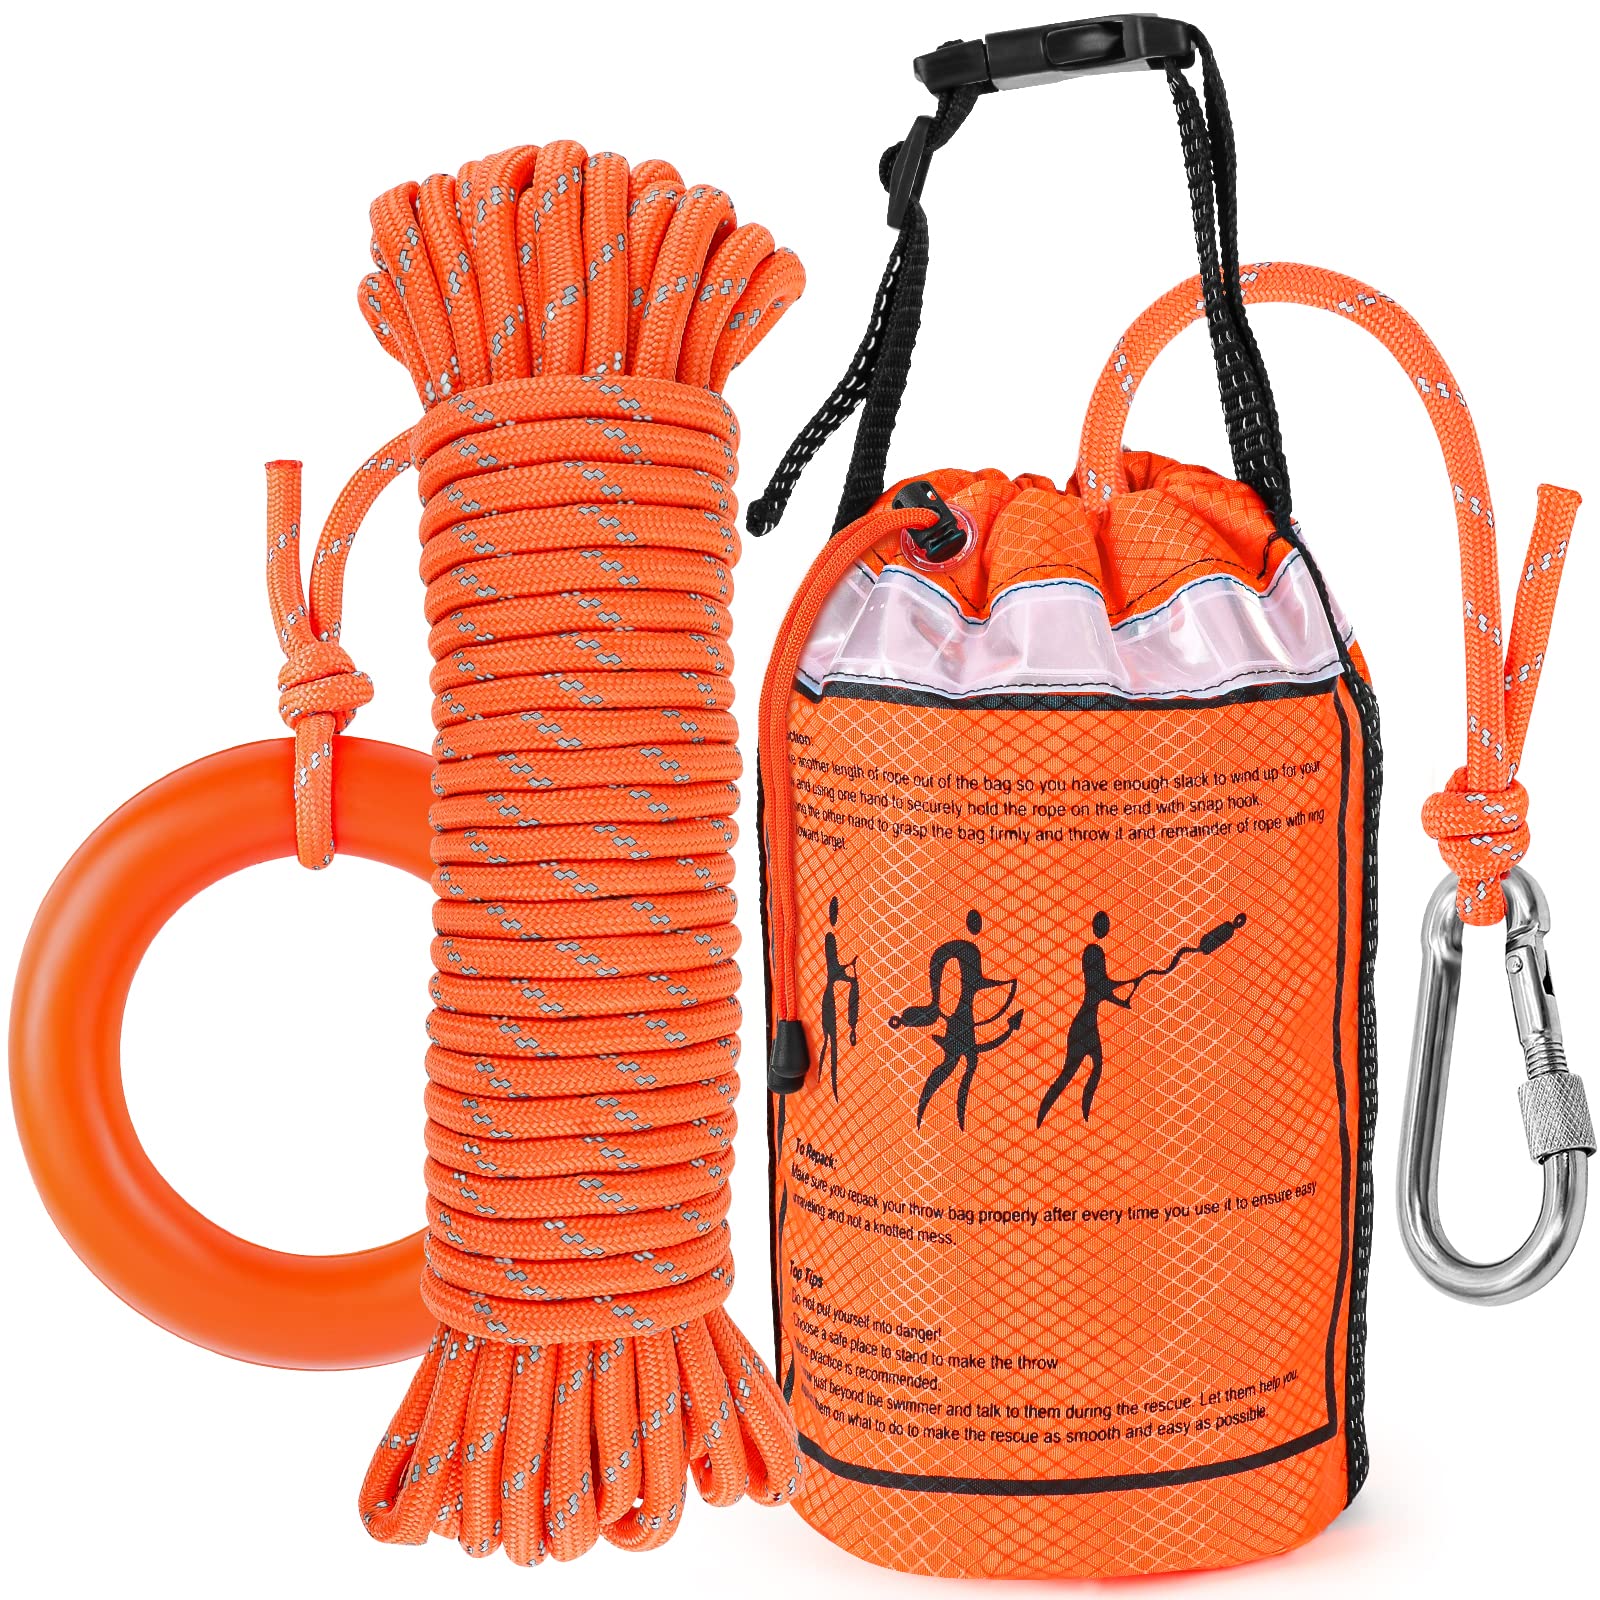 NTR Water Rescue Throw Bag with 50/70/98 Feet of Rope in 3/10 Inch Tensile  Strength Rated to 1844lbs, Throwable Device for Kayaking and Rafting,  Safety Equipment for Raft and Boat 70FT Rescue Bag